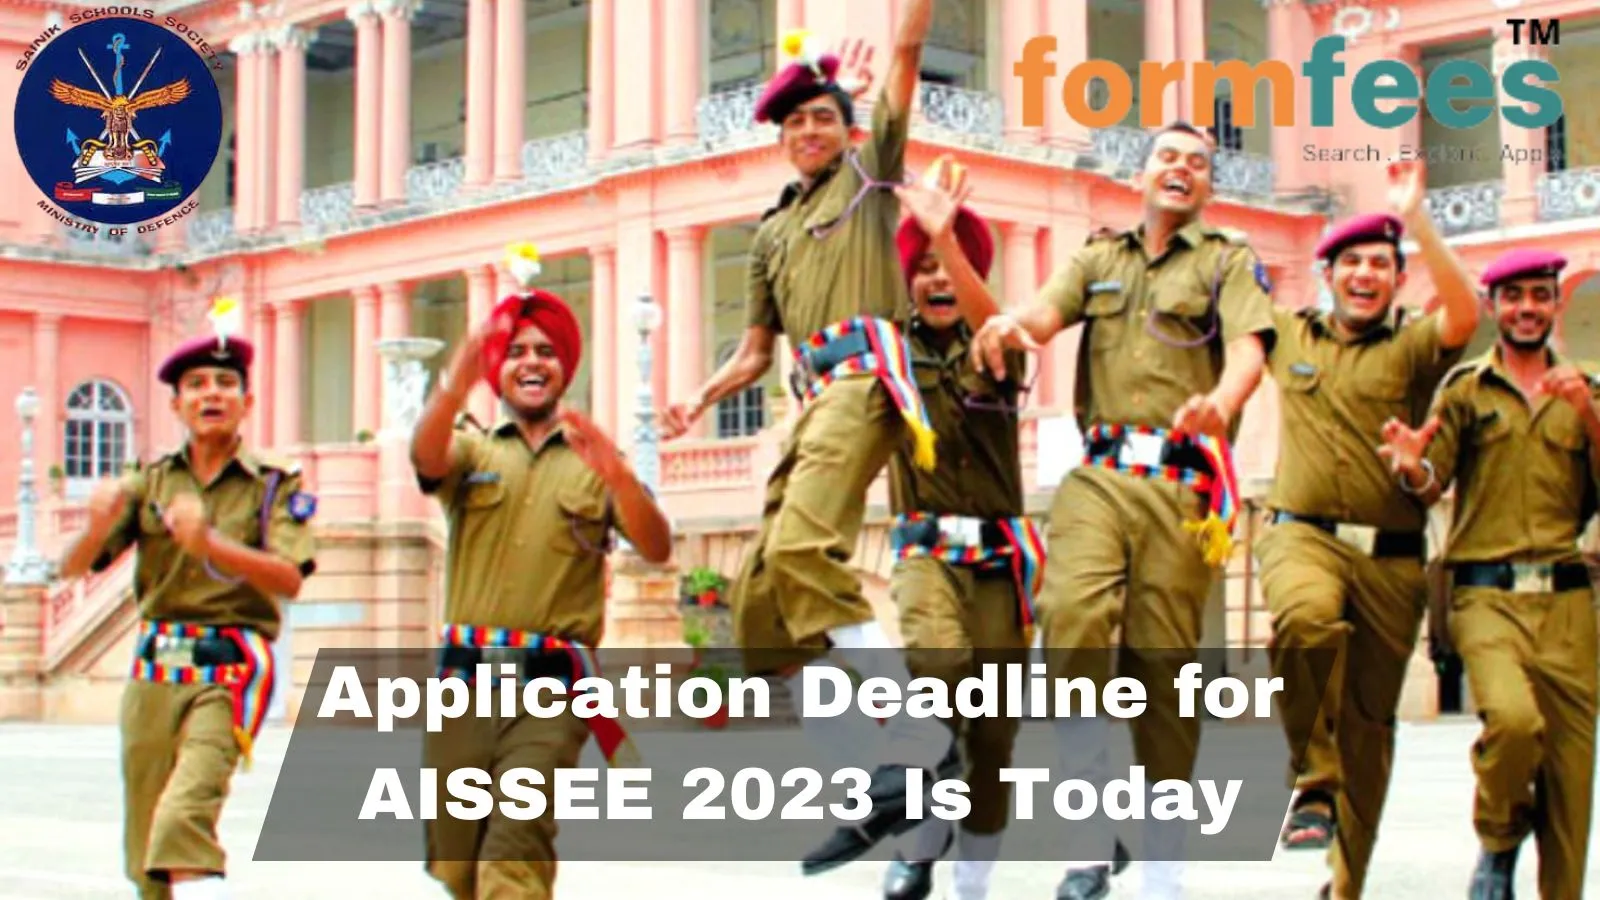 Application Deadline for AISSEE 2023 Is Today